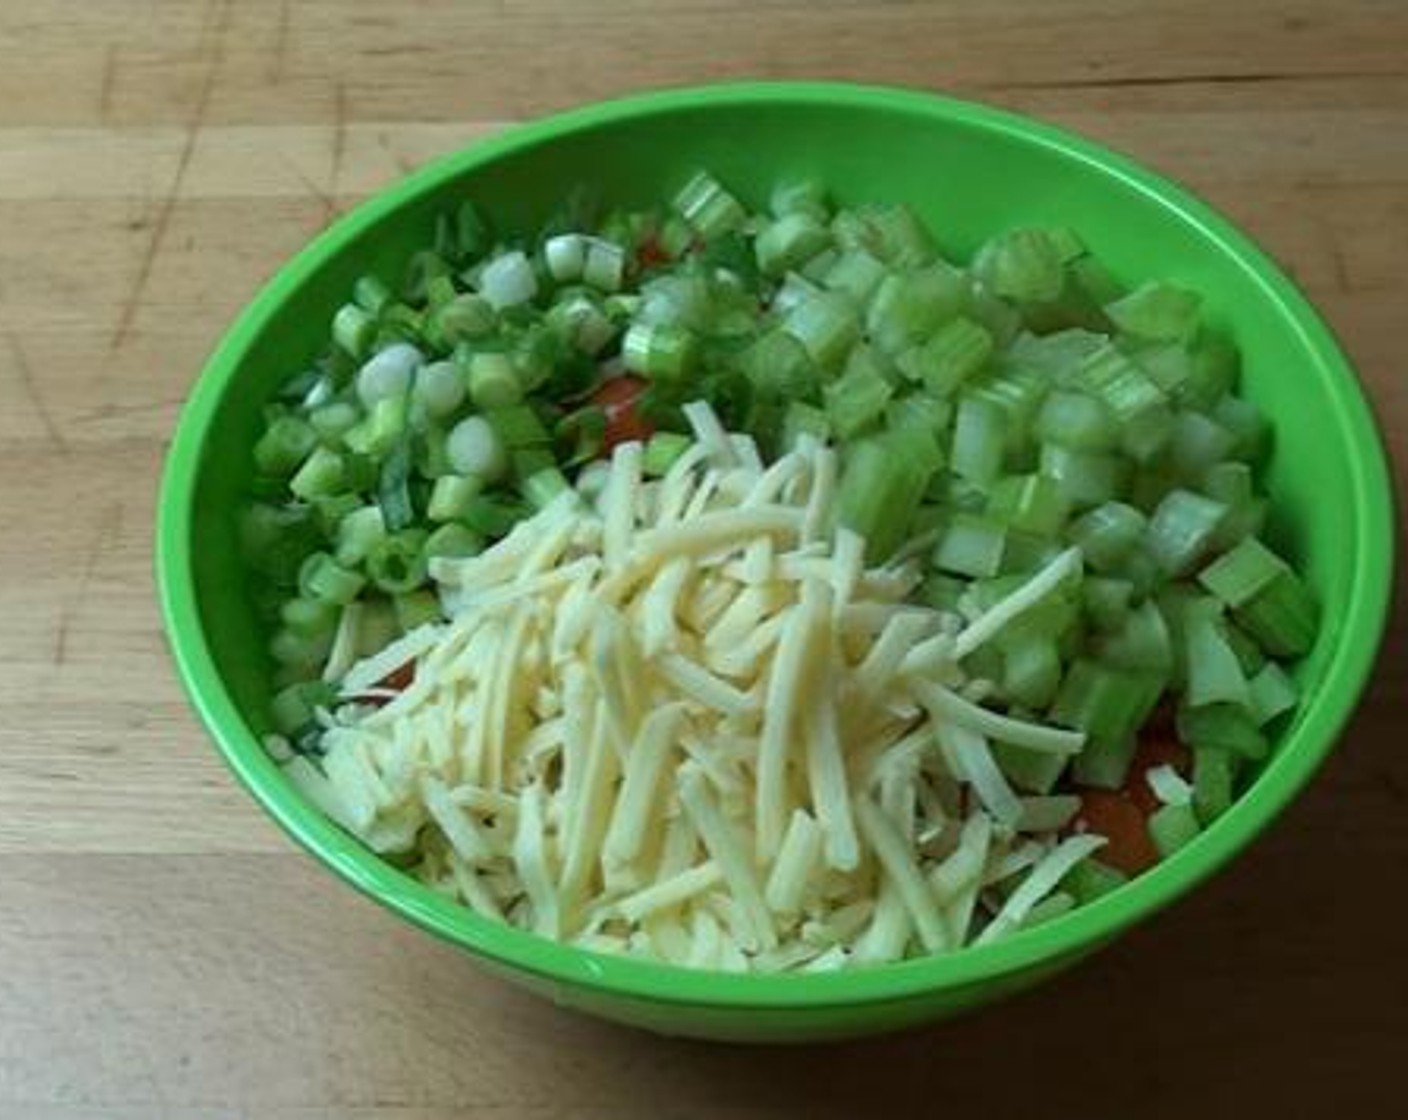 step 2 Add the Cherry Tomatoes (1 2/3 cups), Celery (3 stalks), chopped Scallion (1 bunch), and Cheddar Cheese (1/2 cup) to the bowl. Sprinkle the Olive Oil (1/3 cup) over the mix with the juice from Lemons (1 1/4).